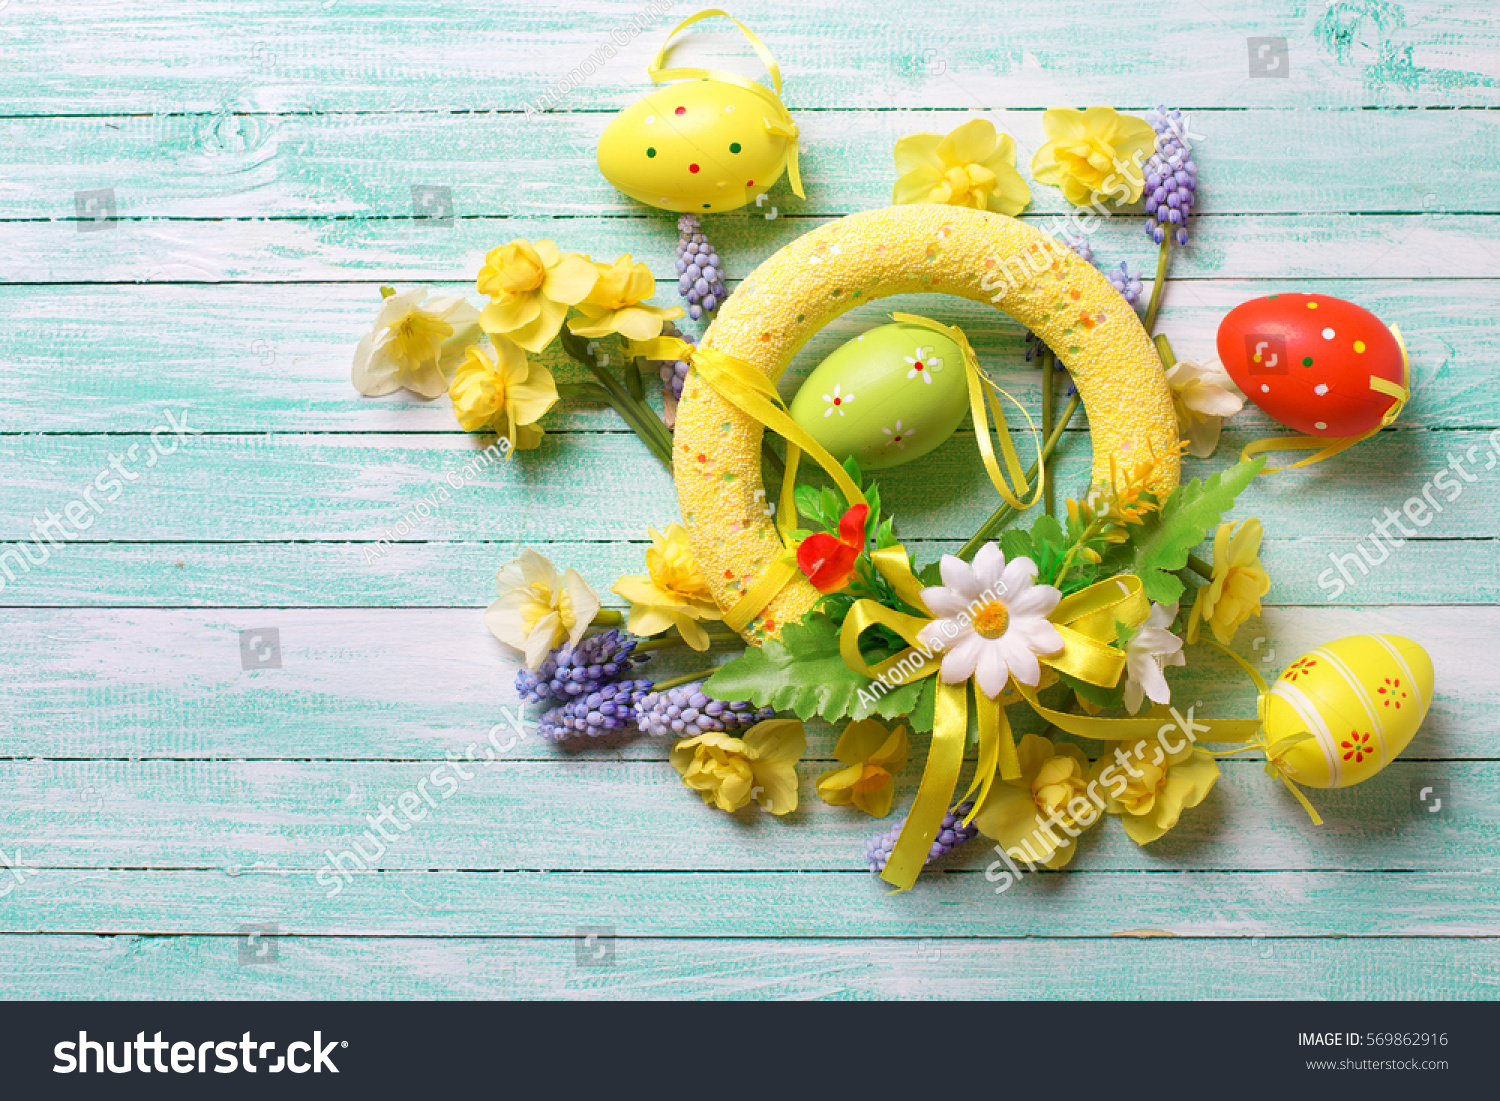  Easter background for design. Decorative Easter wreath and eggs,   bright spring flowers on turquoise wooden background.Selective focus. Place for text.  #569862916